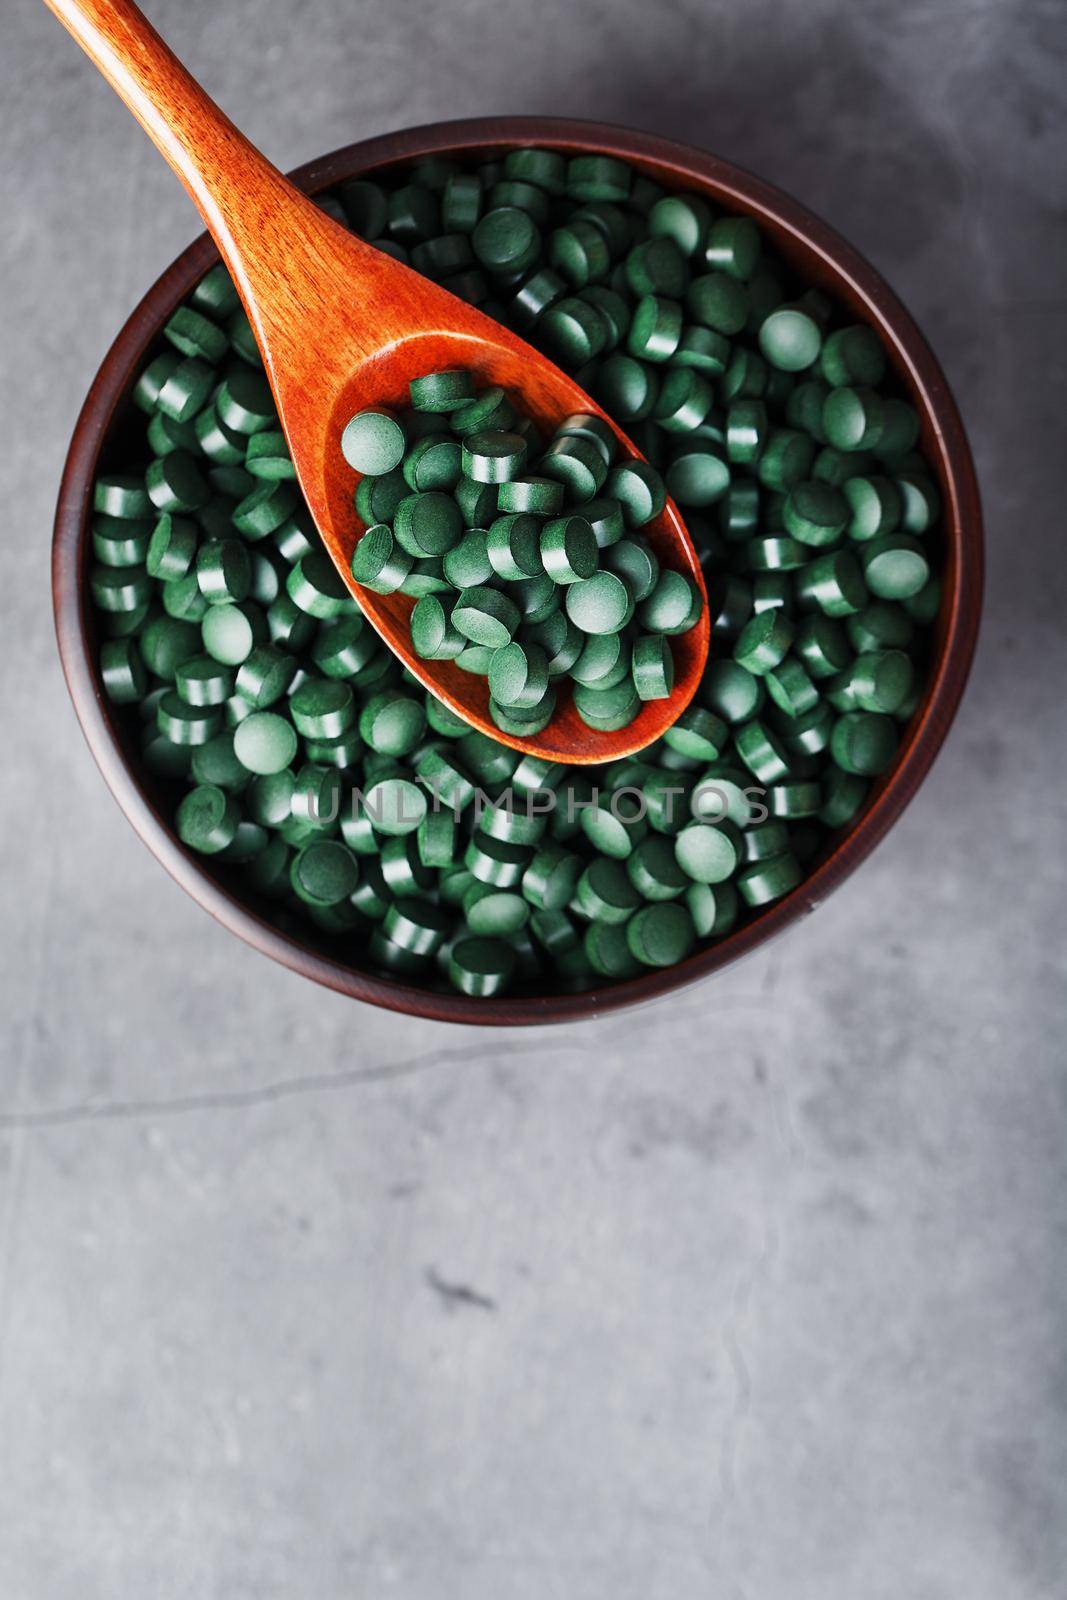 Vitamins from spirulina in a wooden cup with a wooden spoon on a dark background. Vegetarian source of amino acids and omega 3